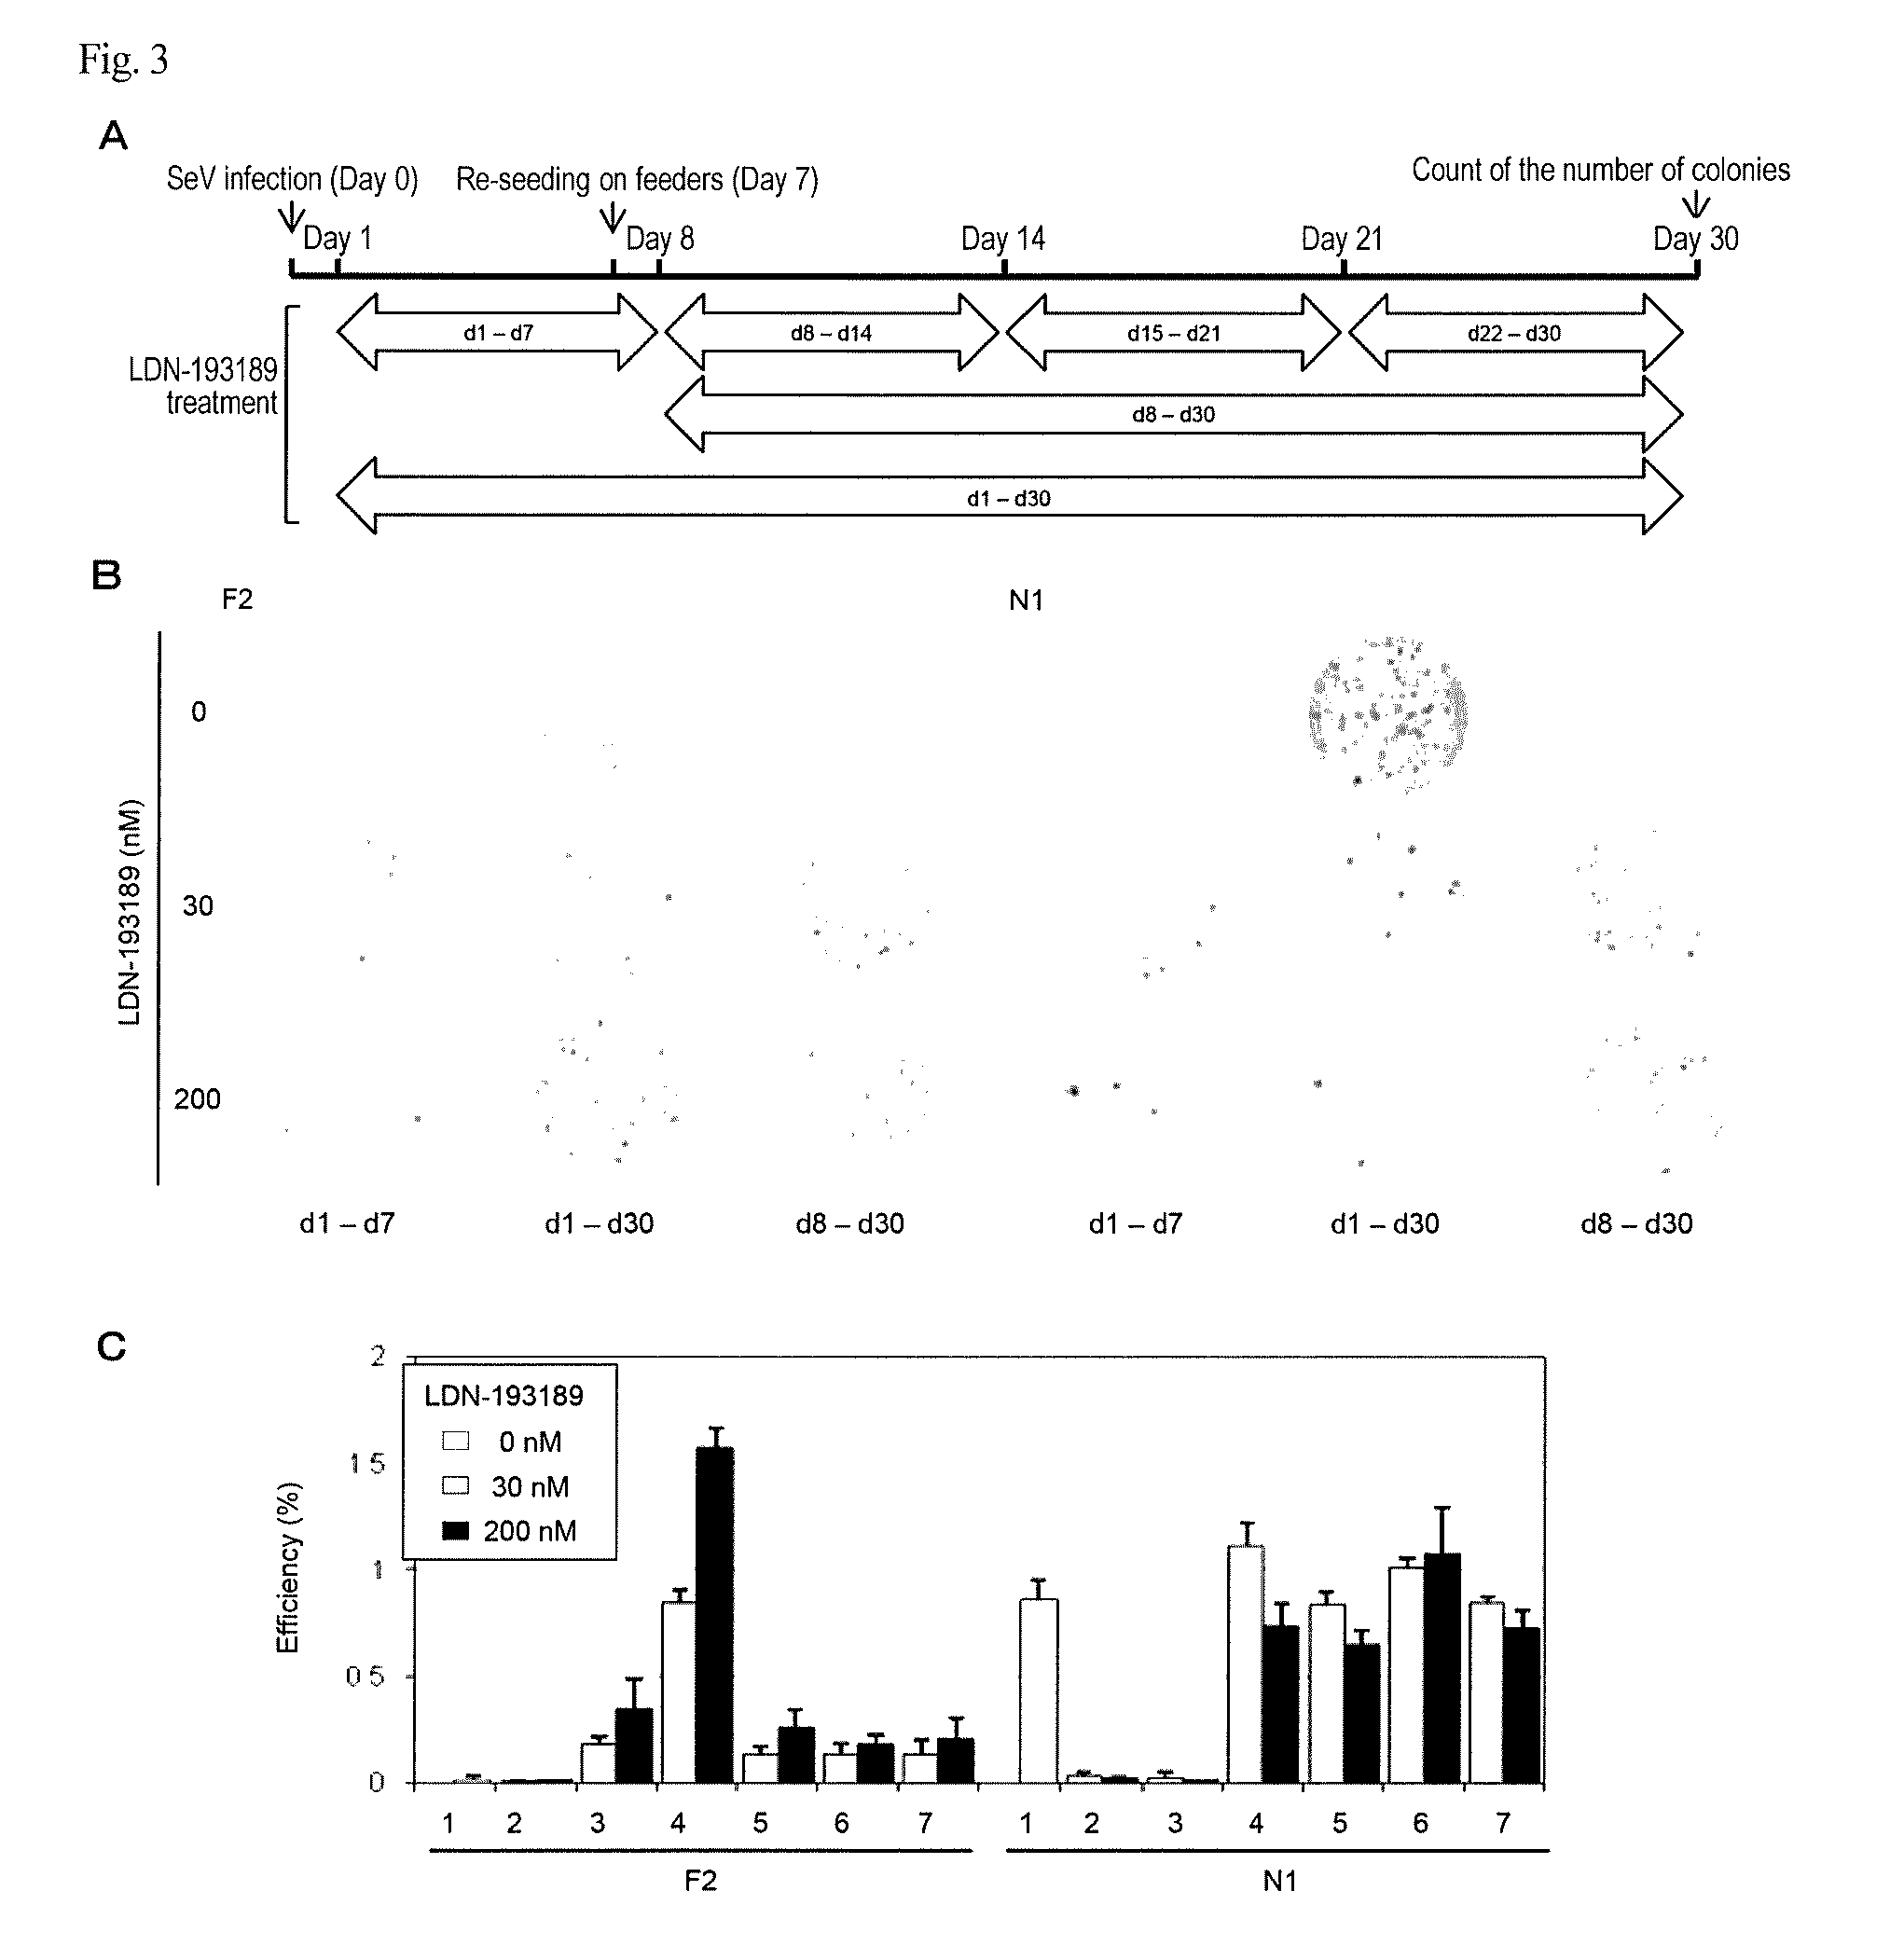 Method of screening for substances capable of promoting induction of induced pluripotent stem cells